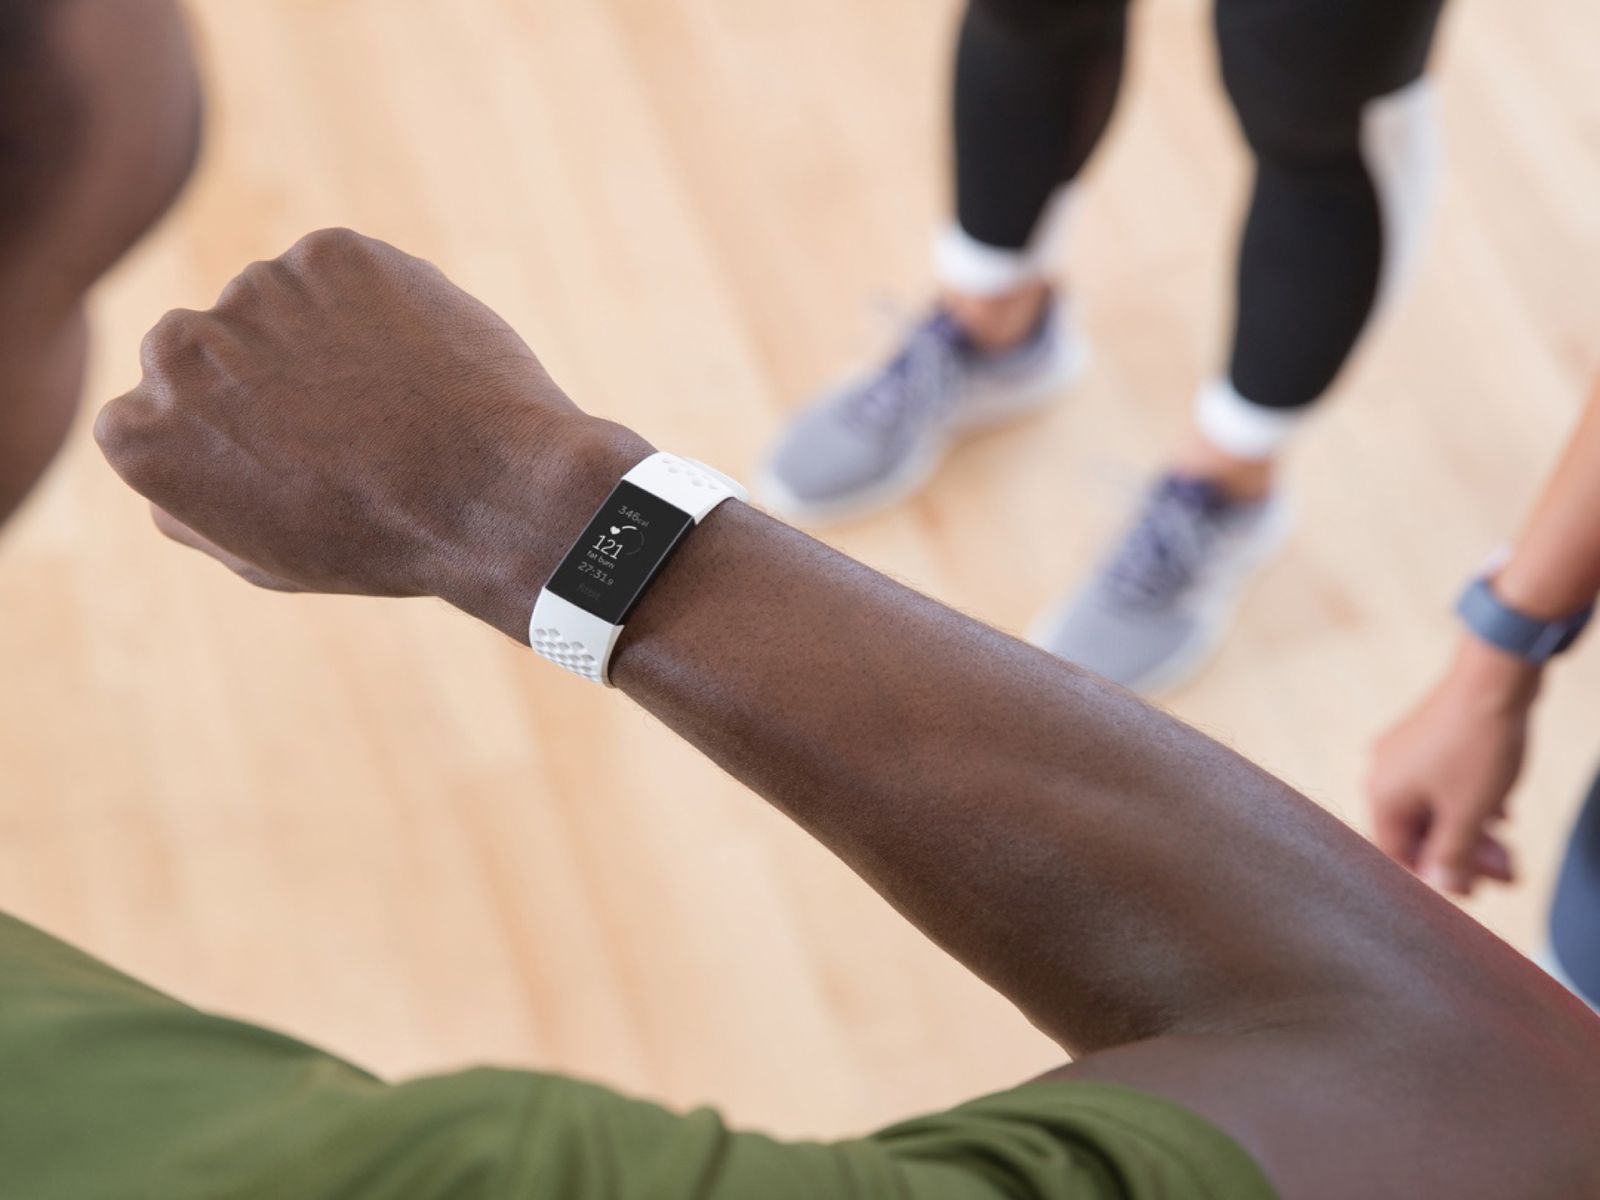 can you play music on fitbit charge 4